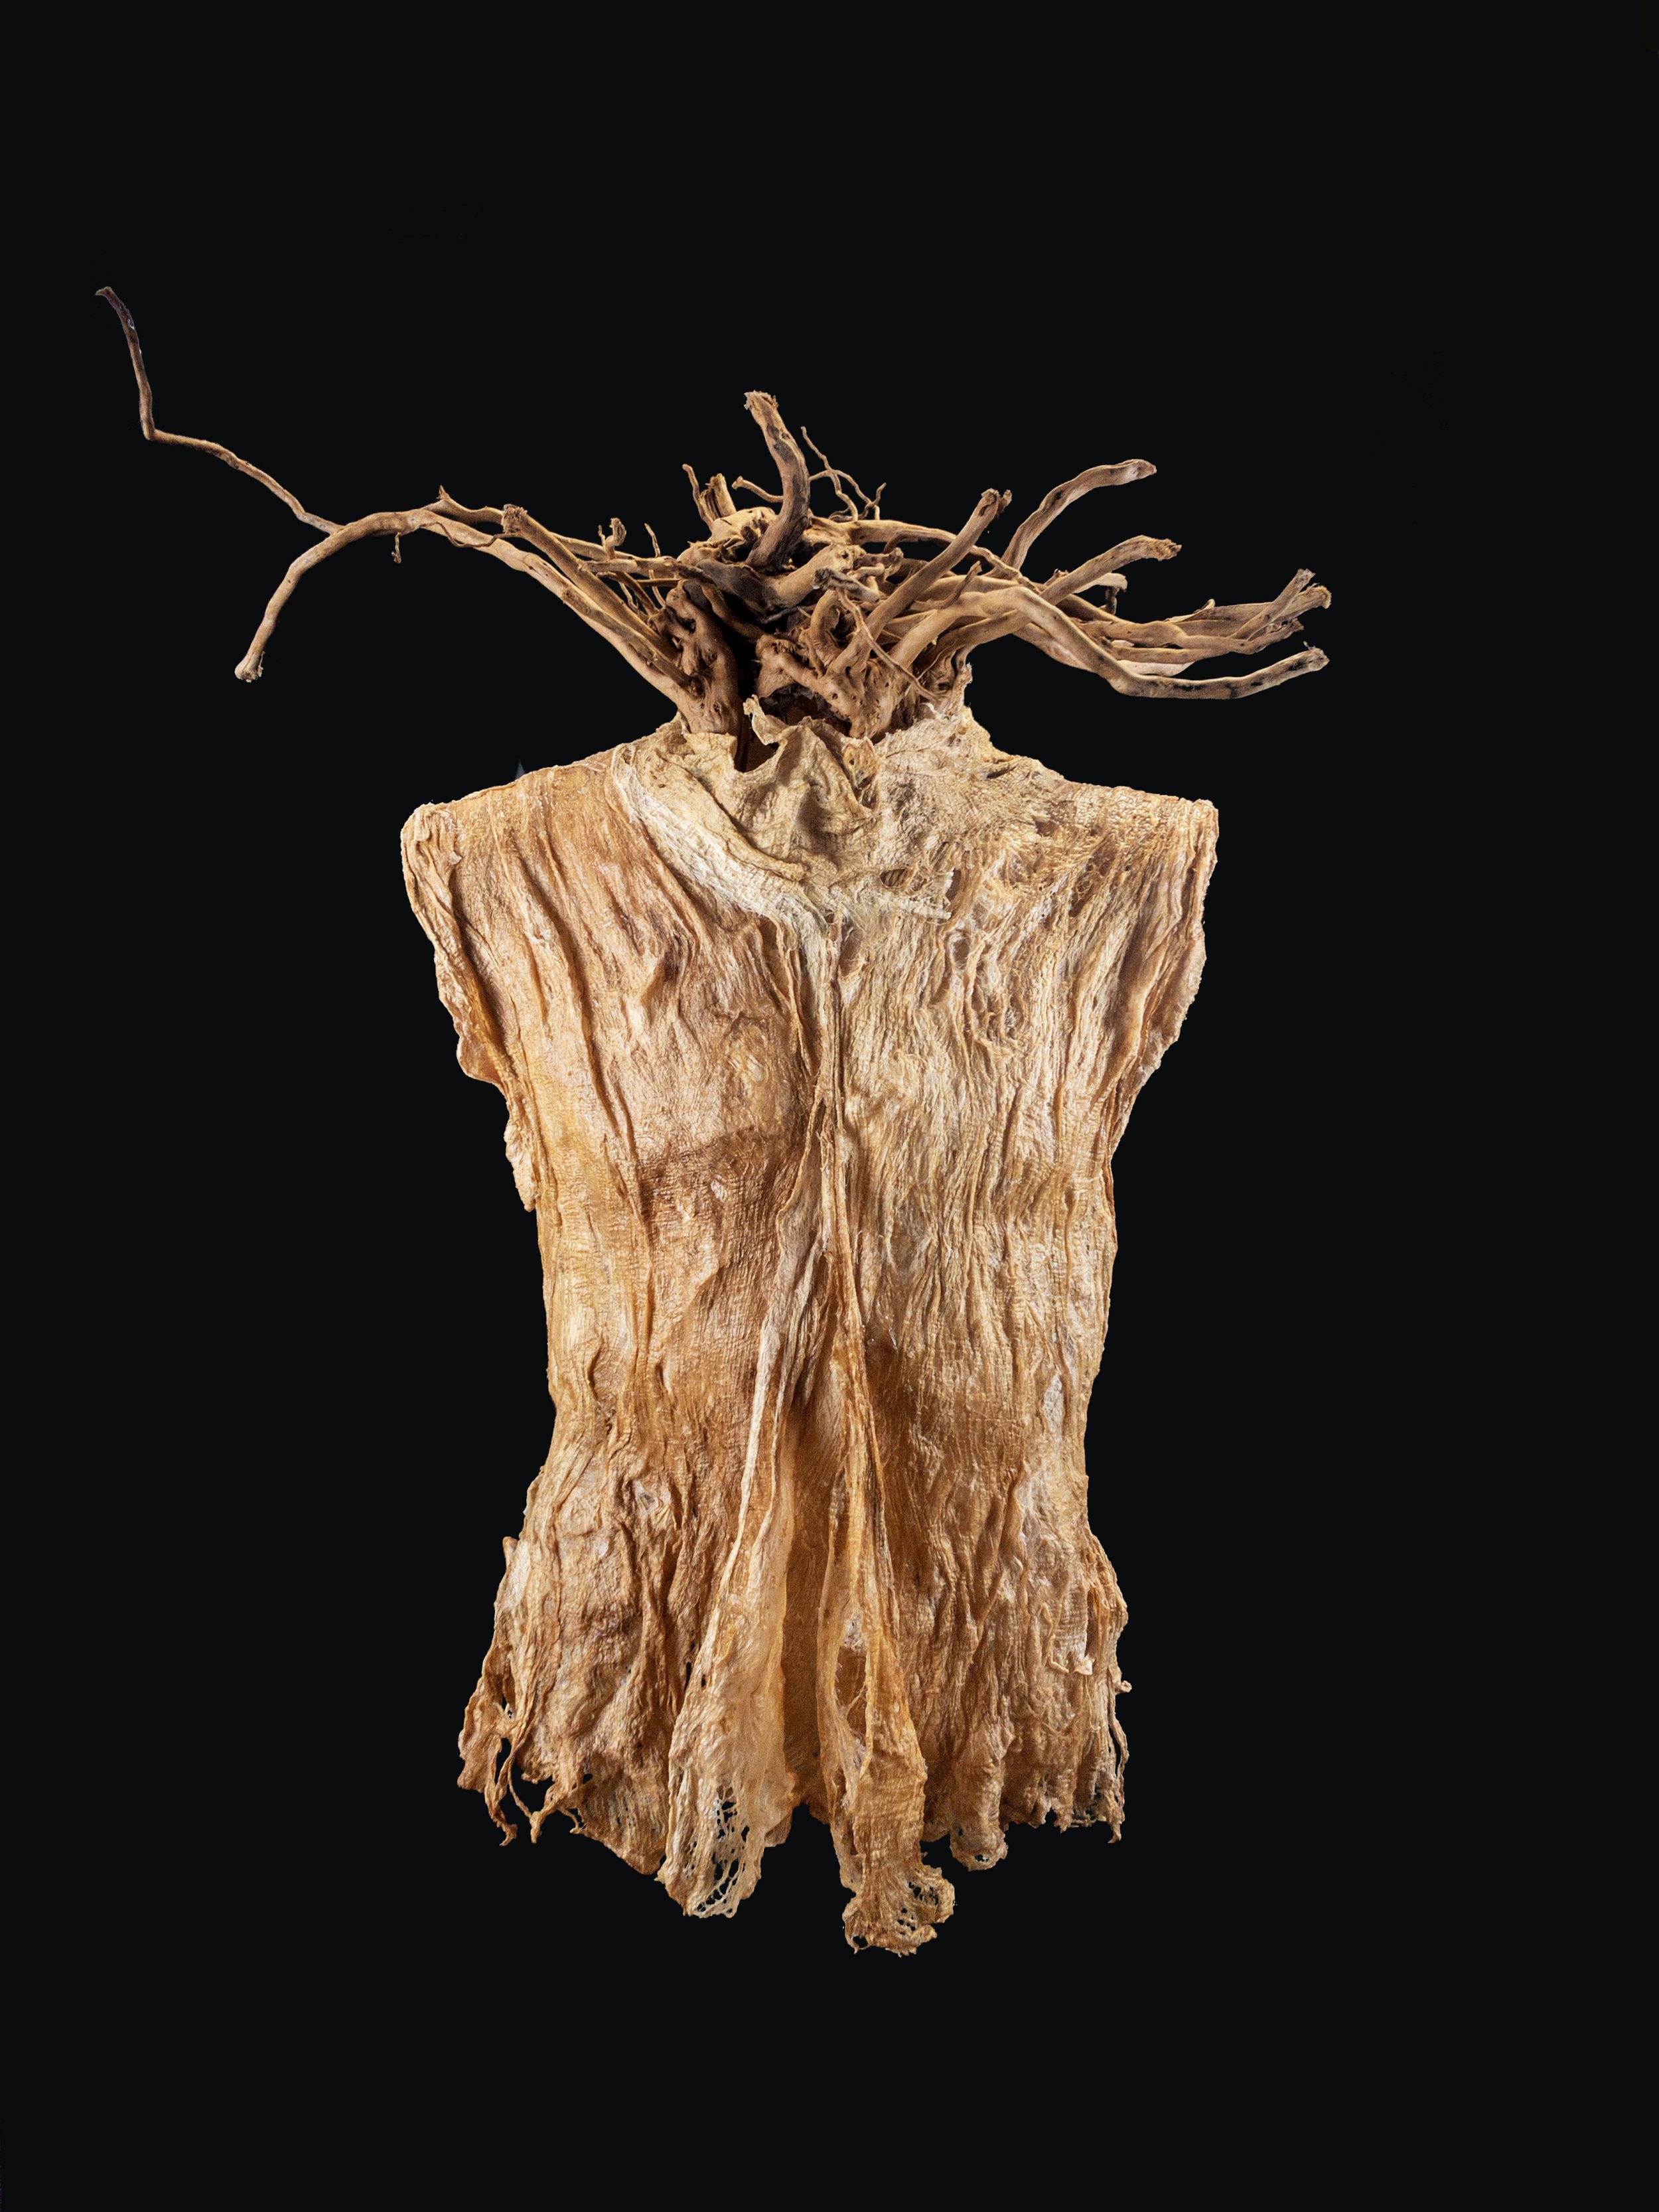 Frances Vye Wilson_Medusa_2019_Cambium fiber from Asian mulberry tree, root_35in x 26in x 20in.jpg